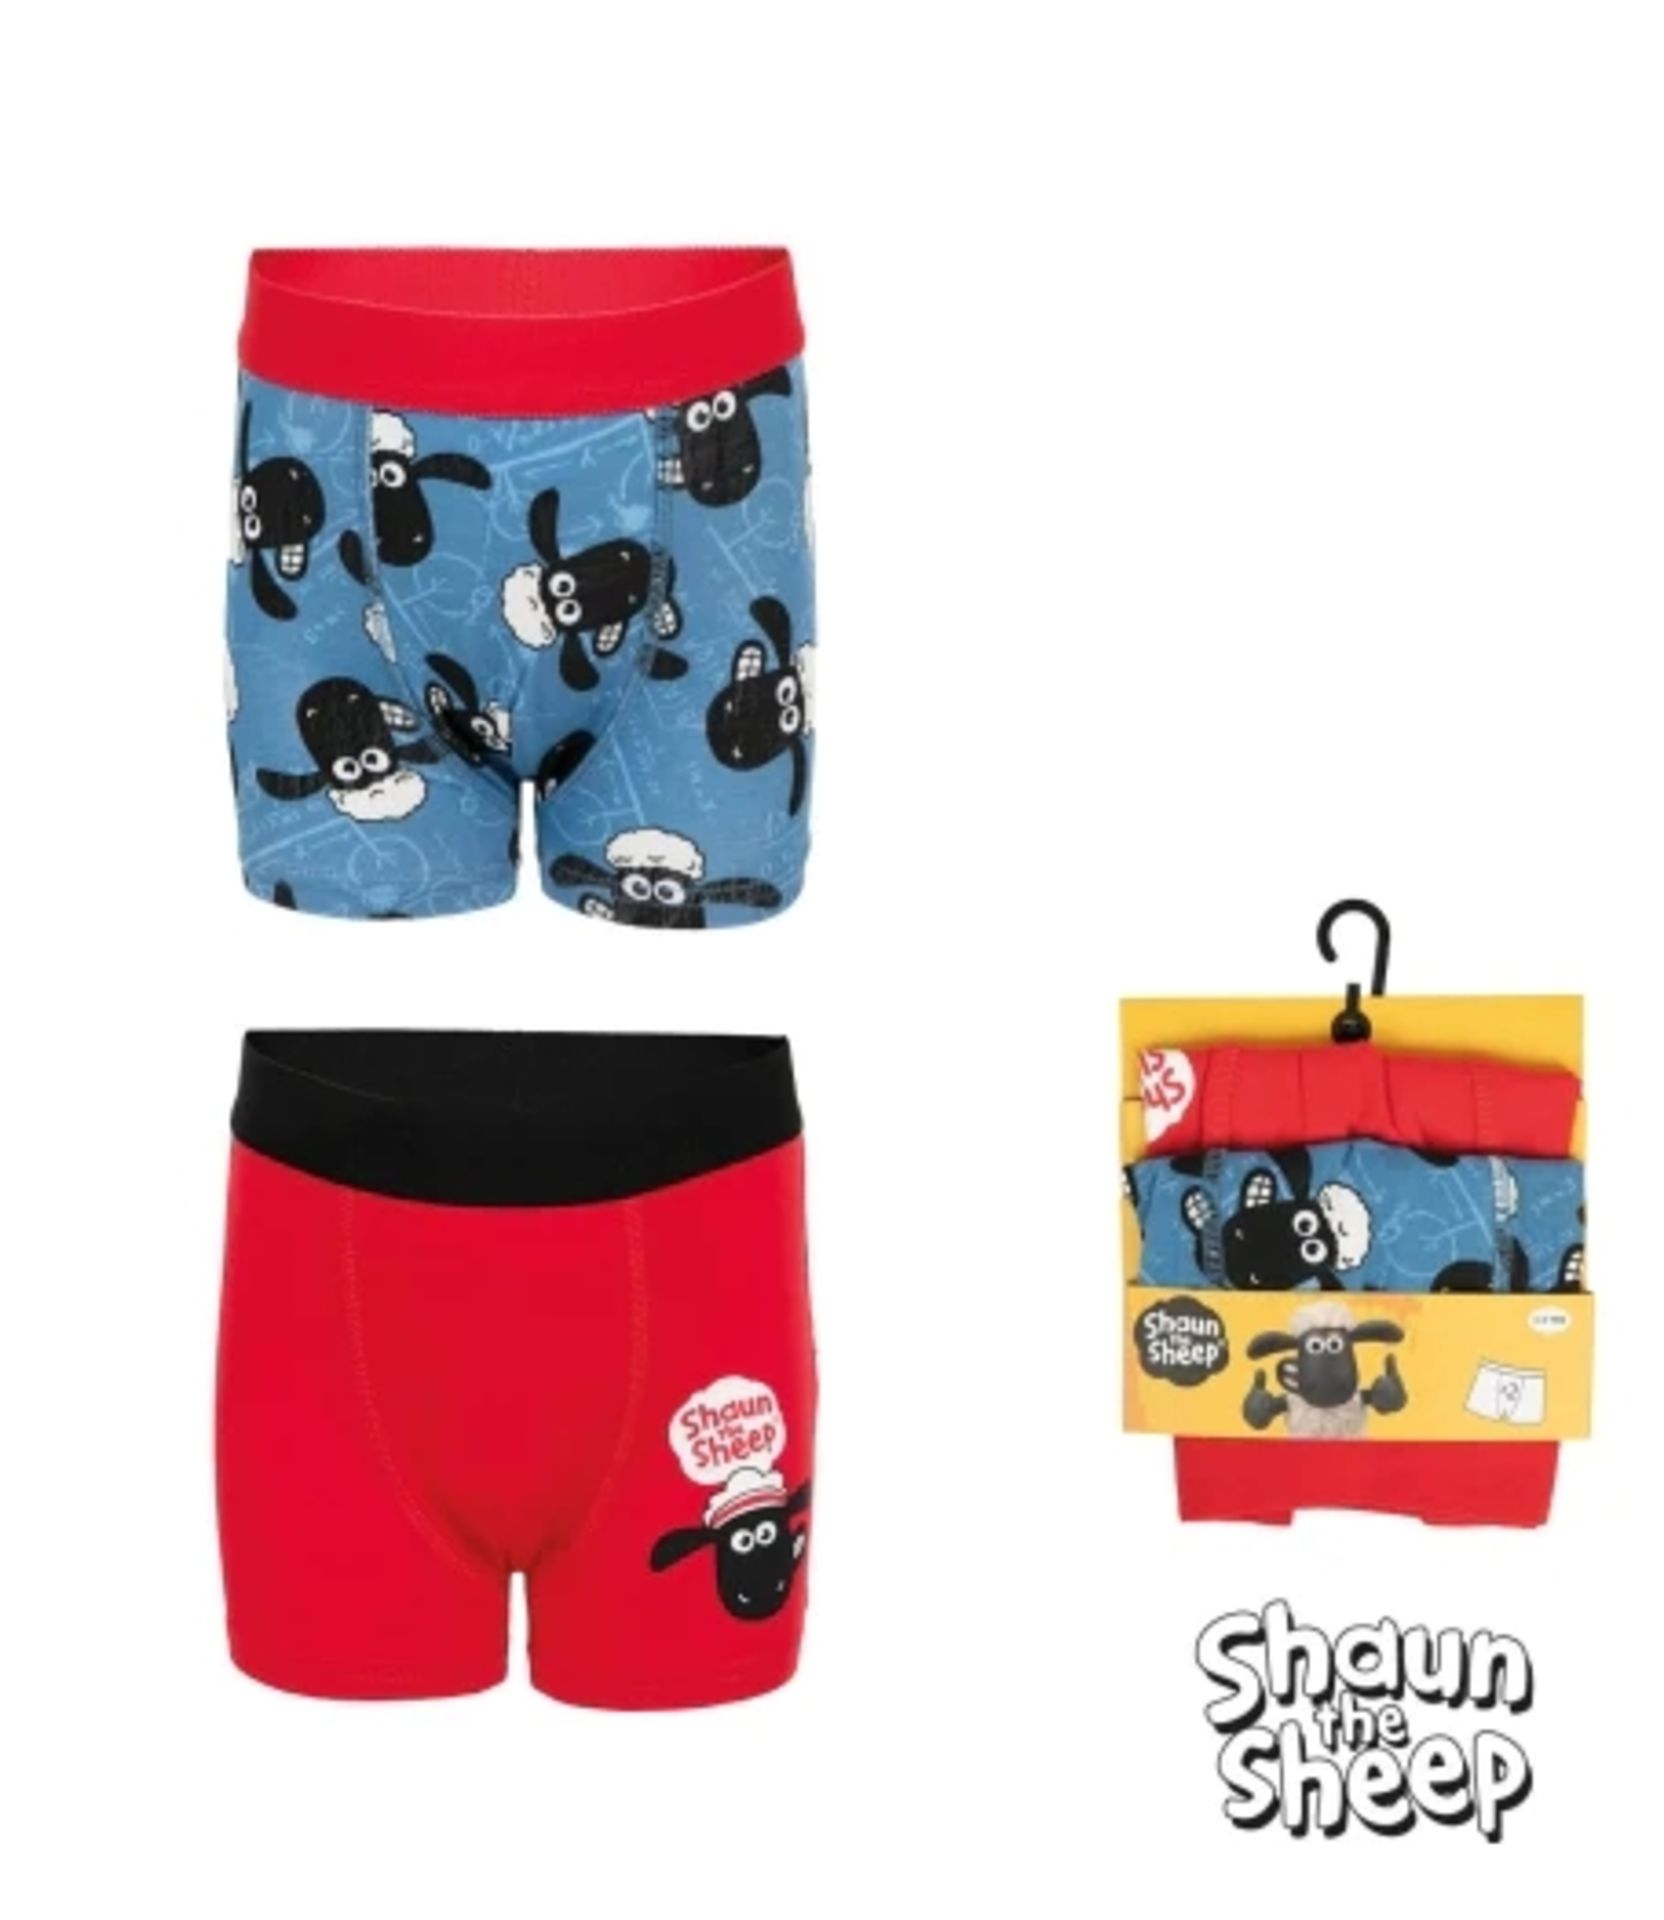 25 x New & Packaged Official Licenced Shaun The Sheep Packs of 2 Boxer Shorts. Sizes: 1-2, 3-4, 5- - Image 2 of 2